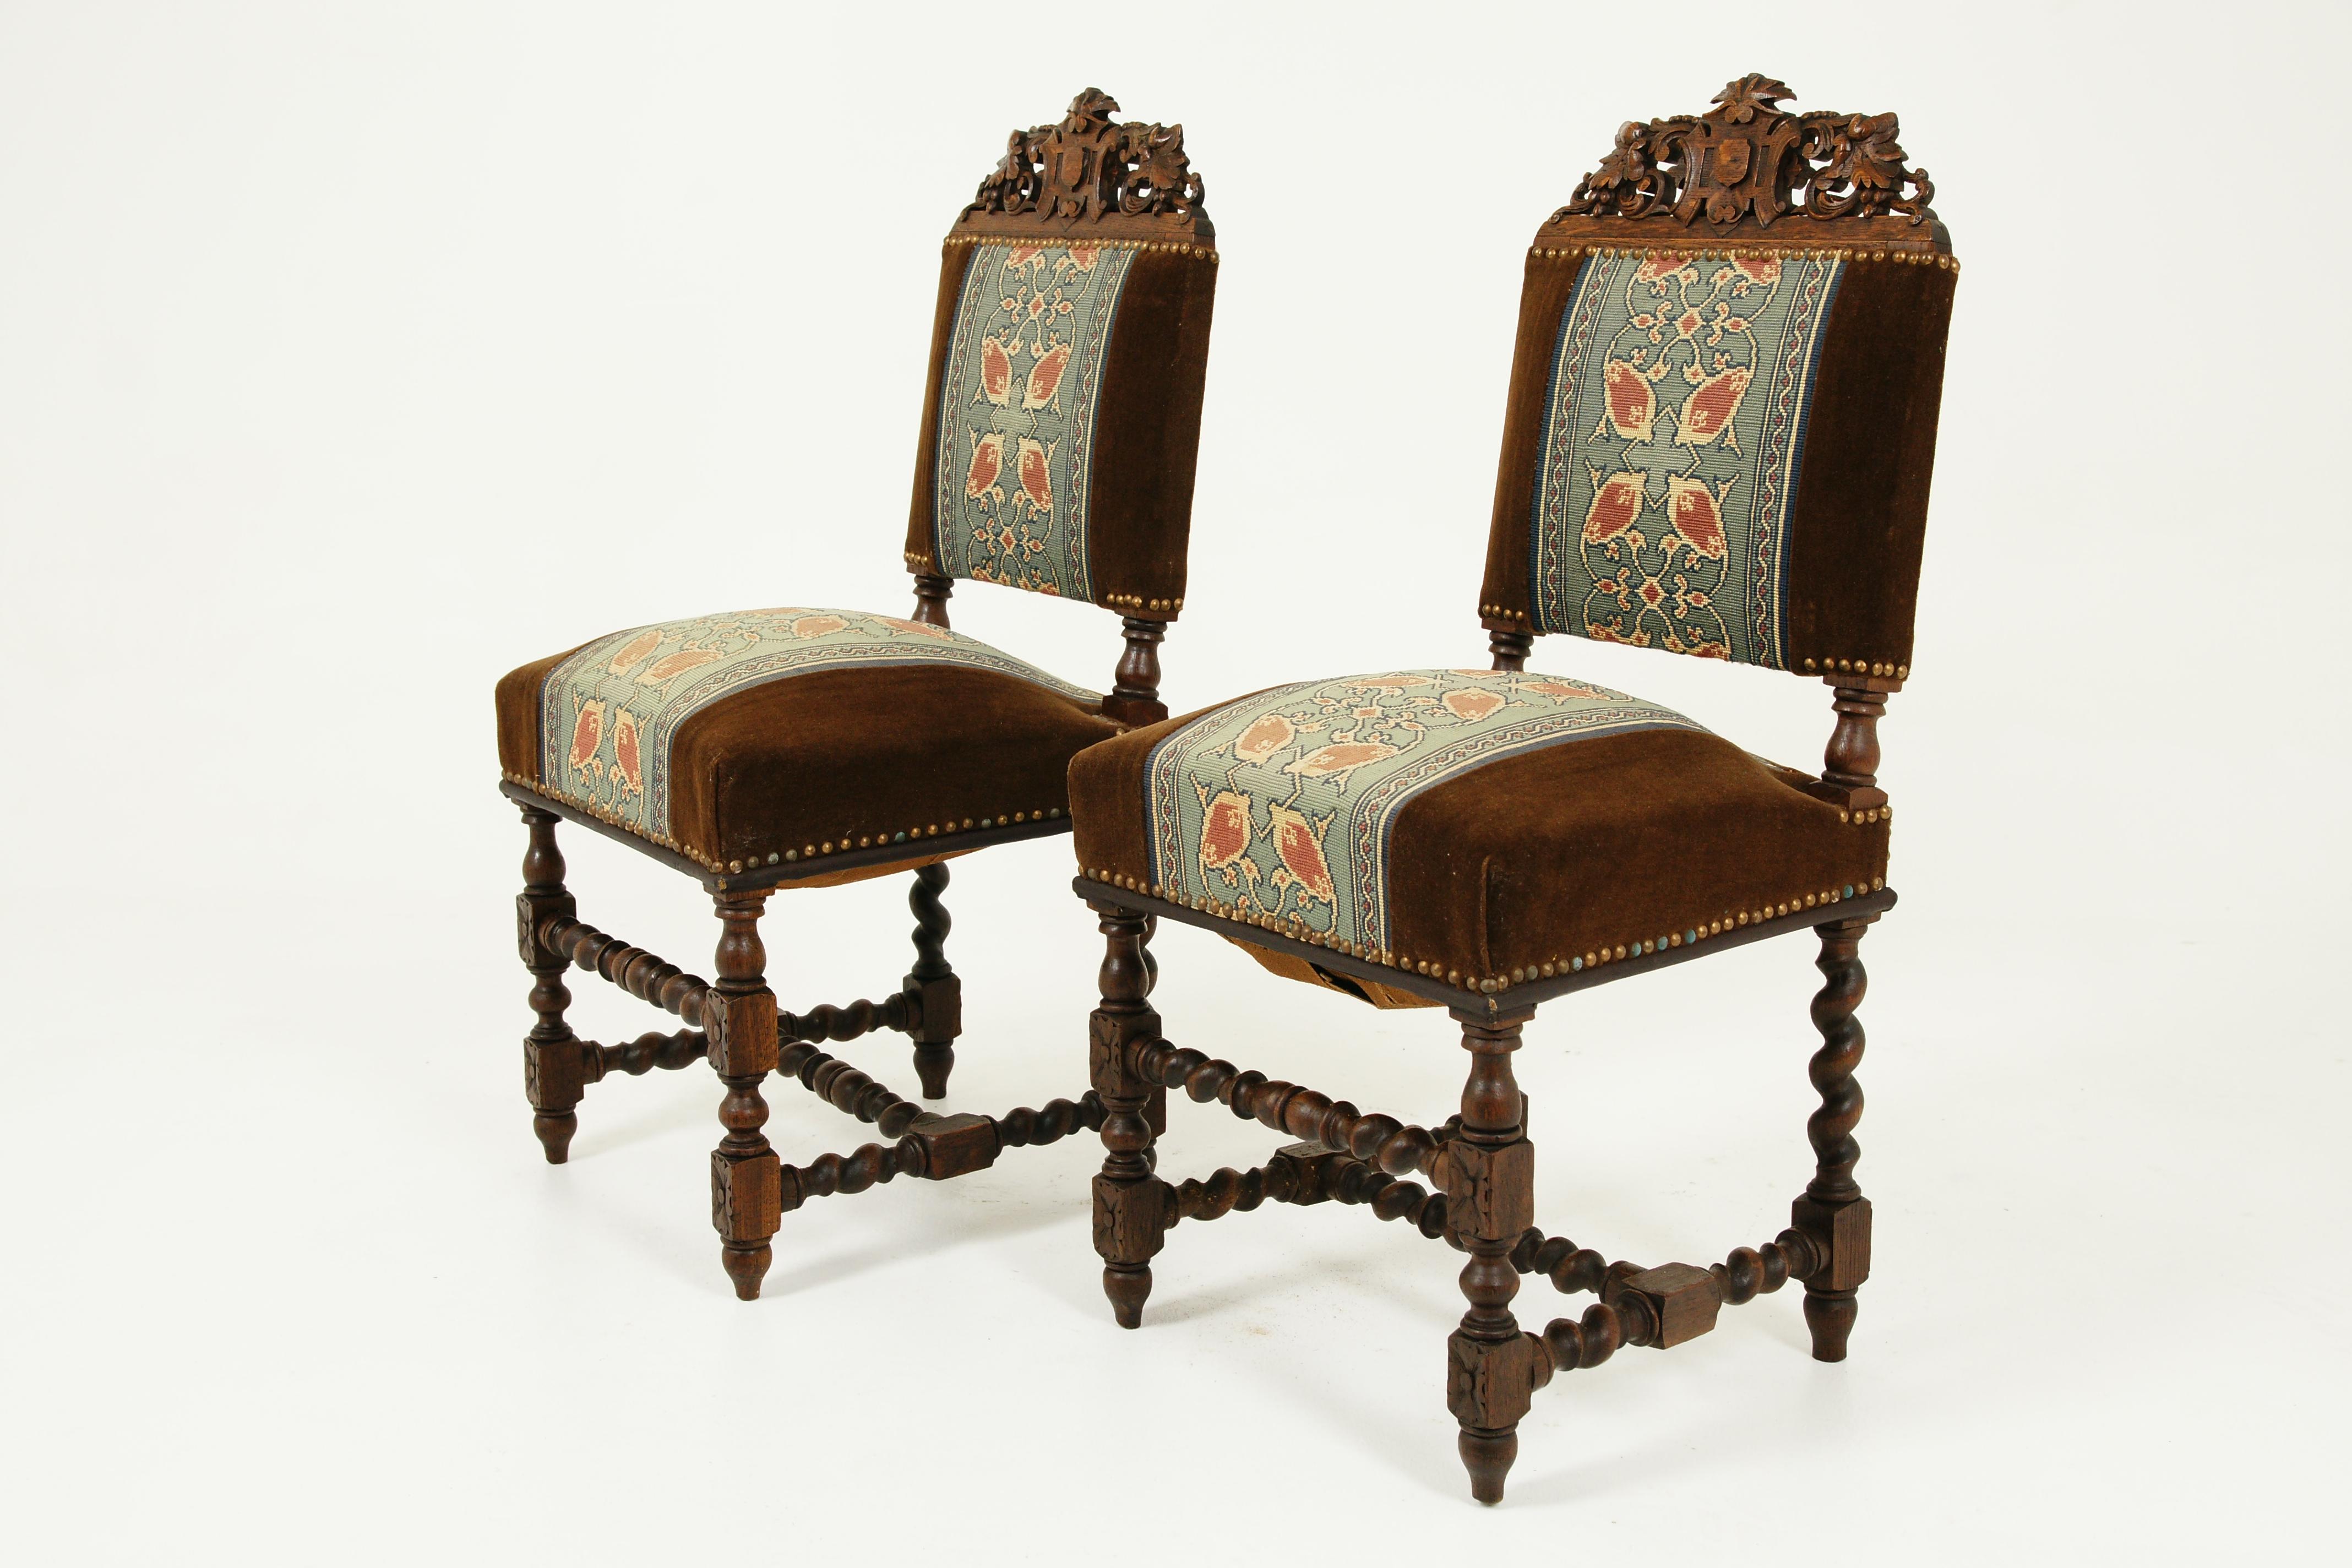 Scottish Antique Pair of Chairs, Carved Oak, Barley Twist, Upholstered, Scotland 1870